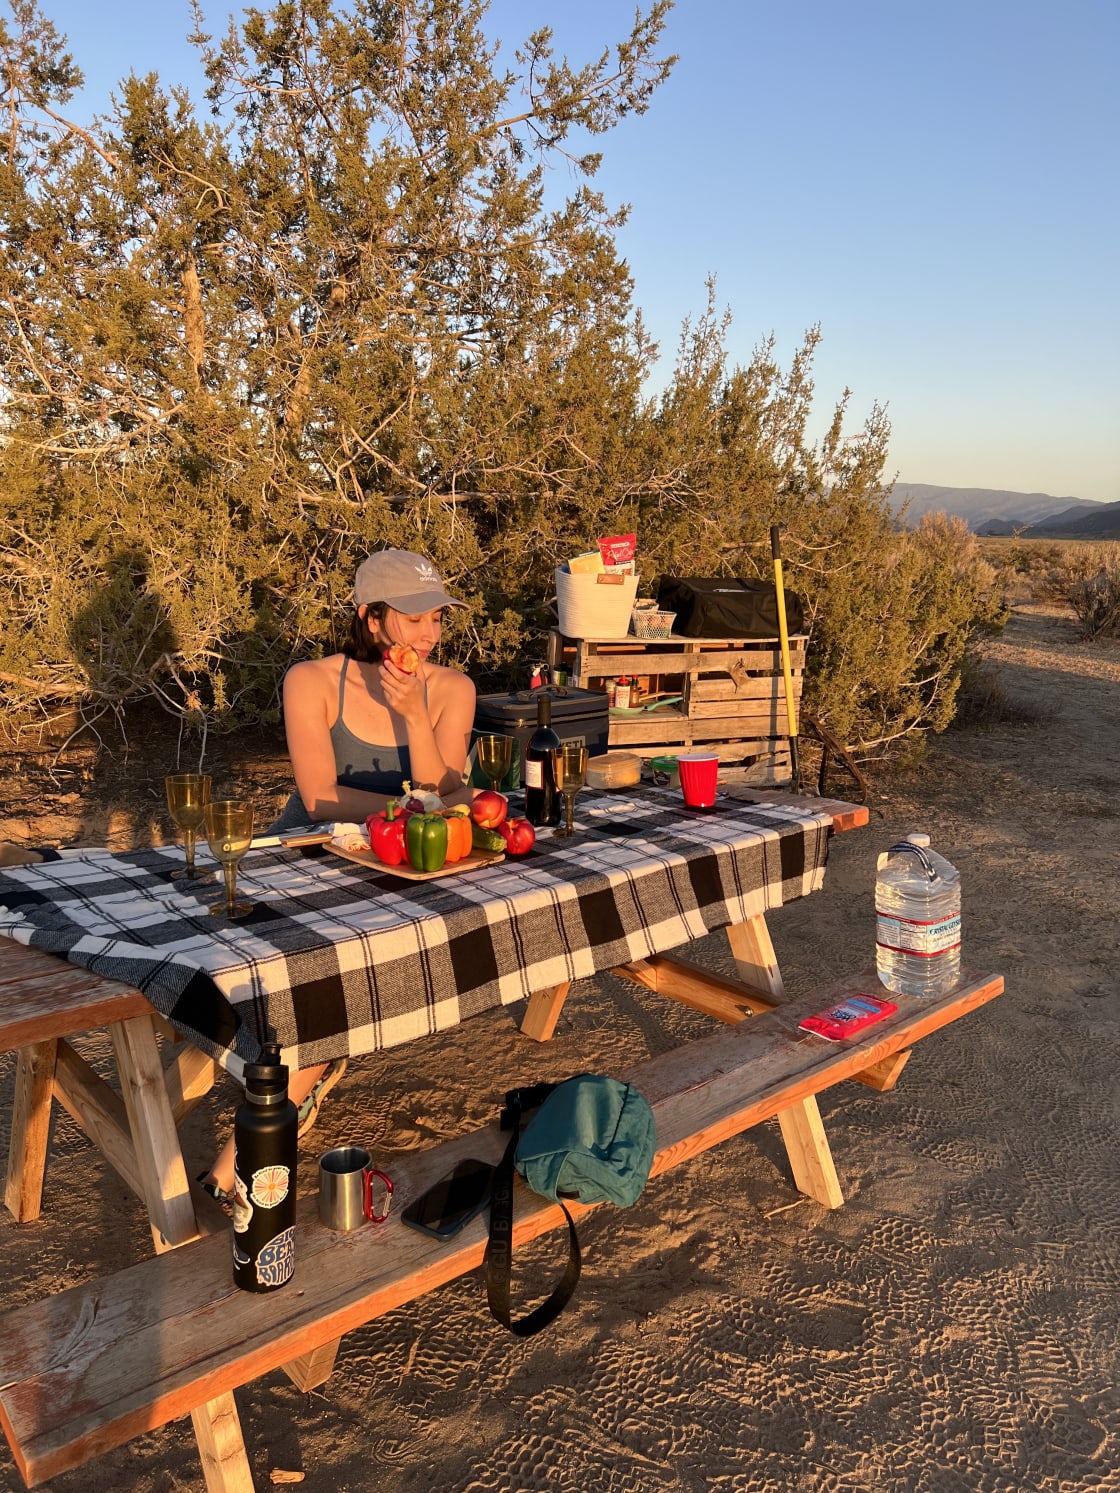 Setting up our meal at the campsite (picnic table is available at the campsite)